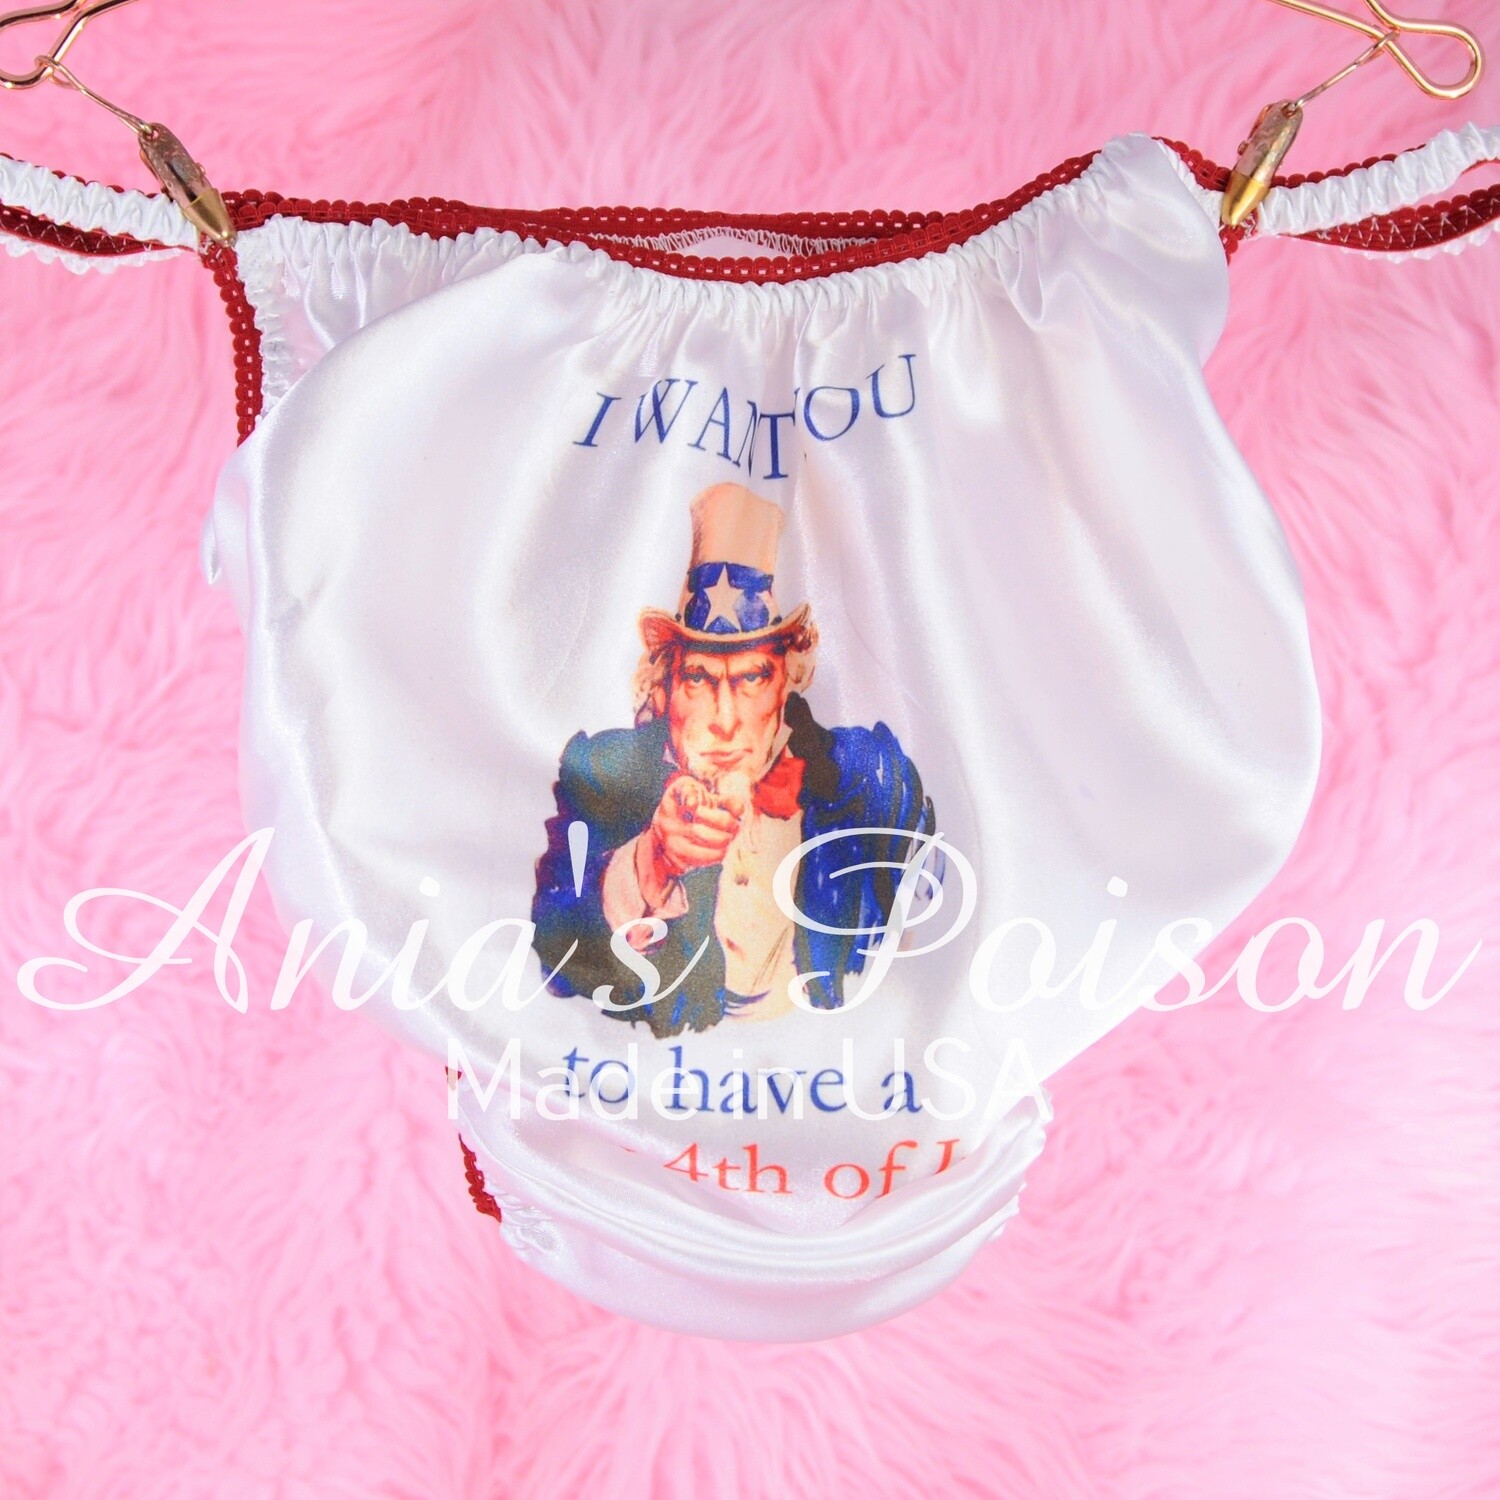 July 4th Uncle Sam limited edition red white and blue shiny Satin string bikini panties